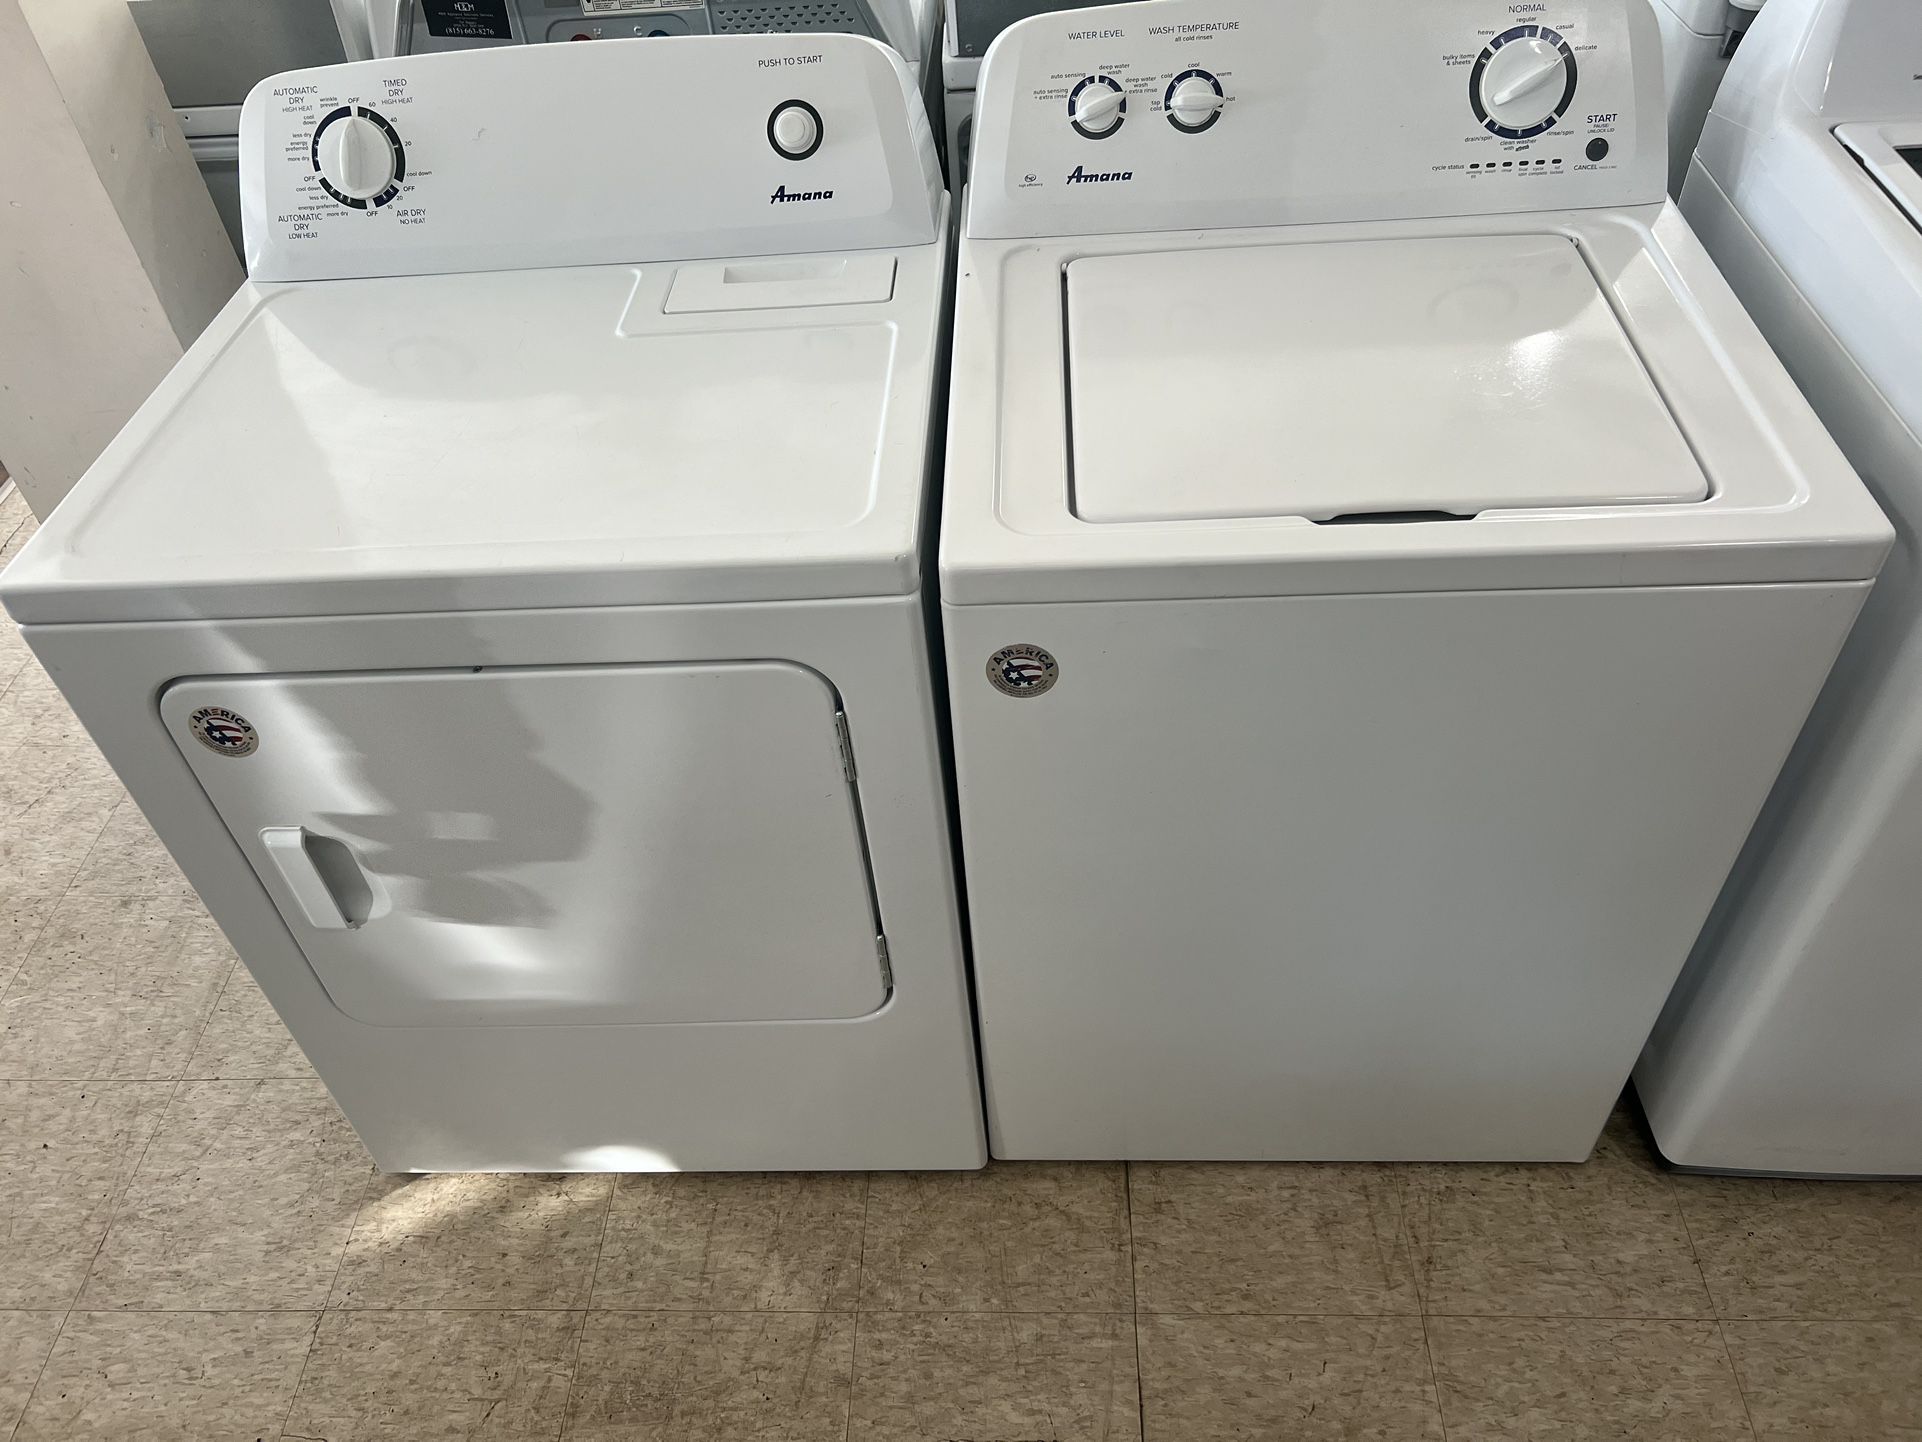 Amana High Efficiency Washer And Electric Dryer